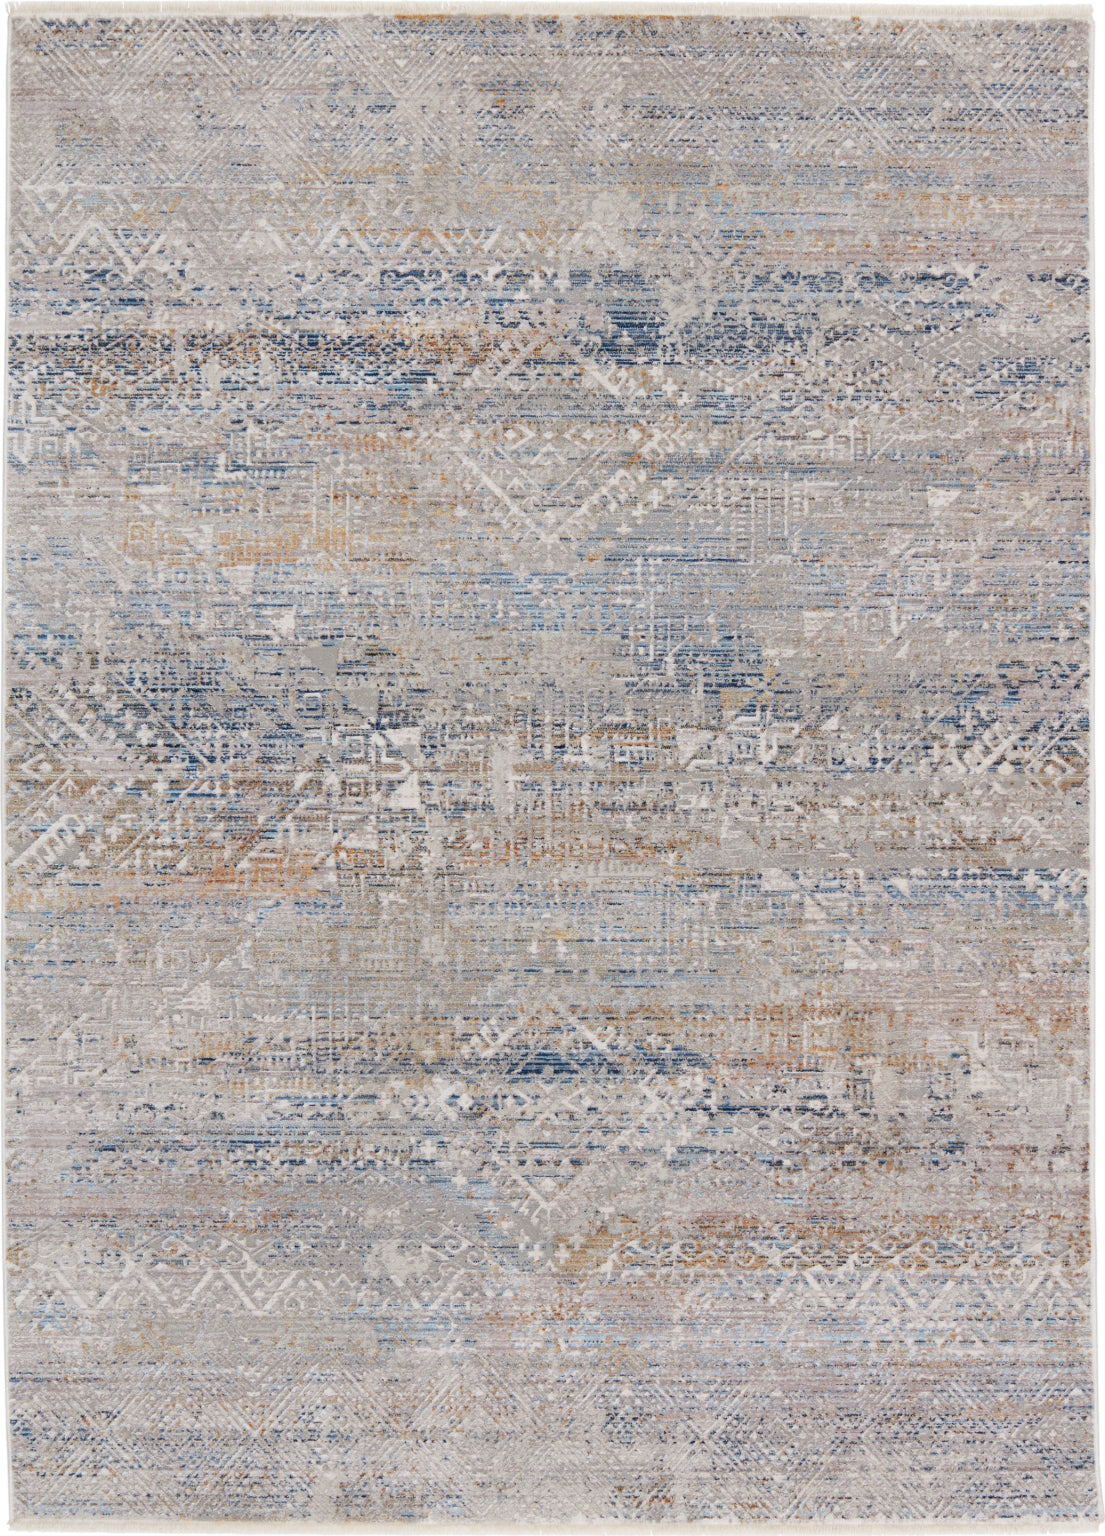 Jaipur Living Audun Louden AUD05 Gray/Blue Area Rug by Vibe - Top Down